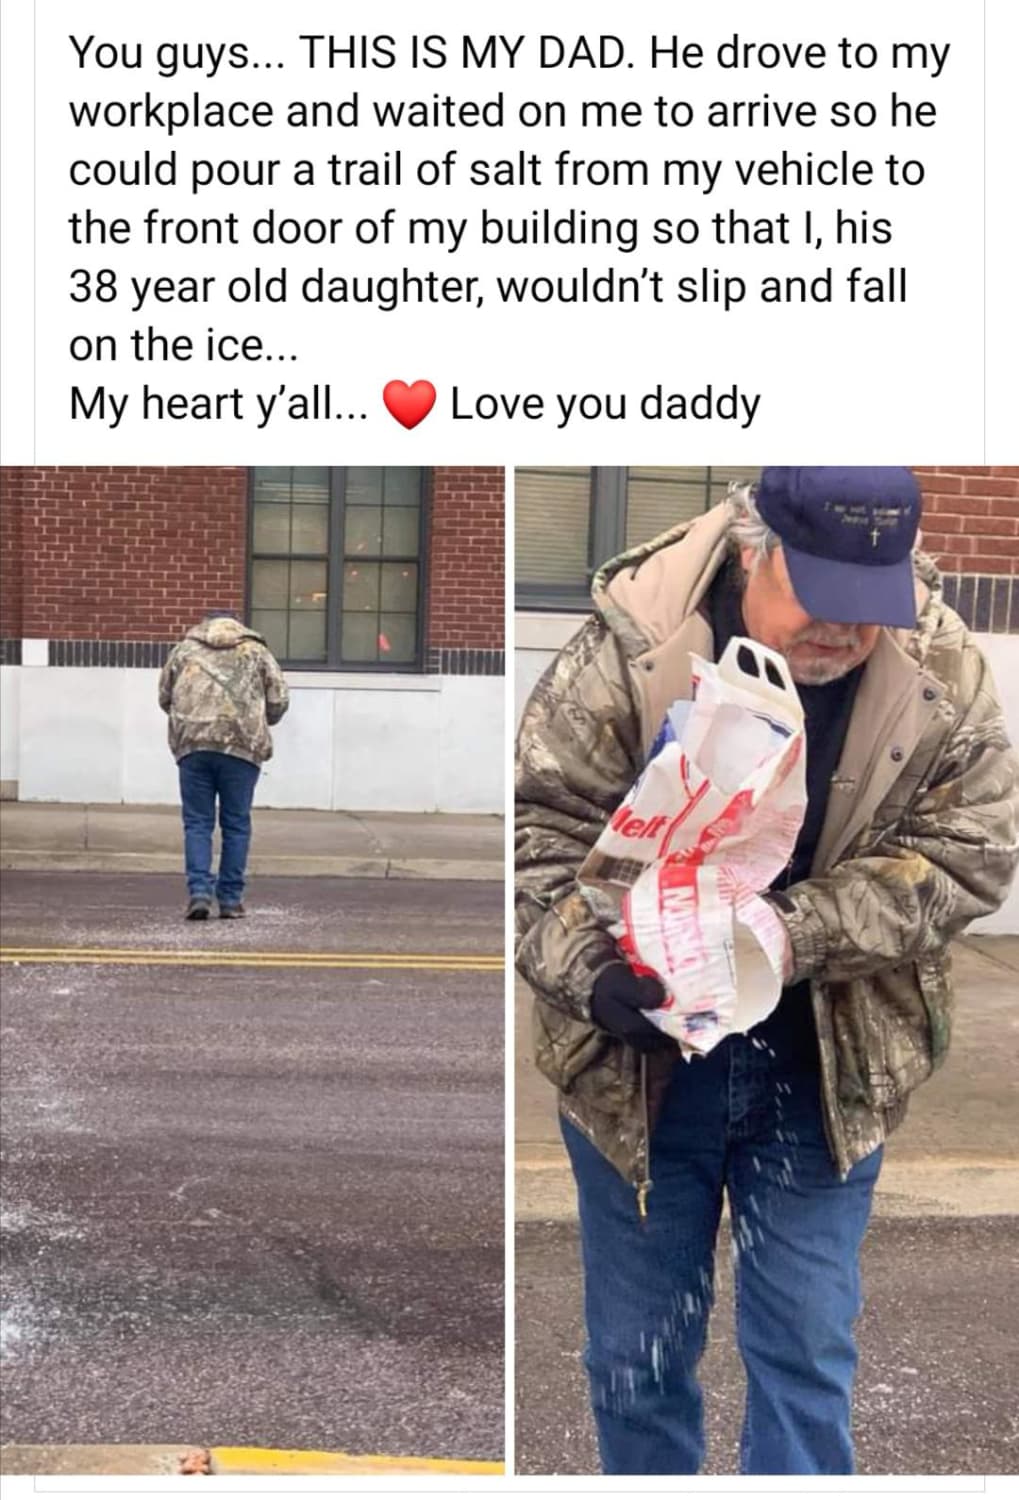 This Dad drives to his daughters workplace to put salt down for her vehicle.